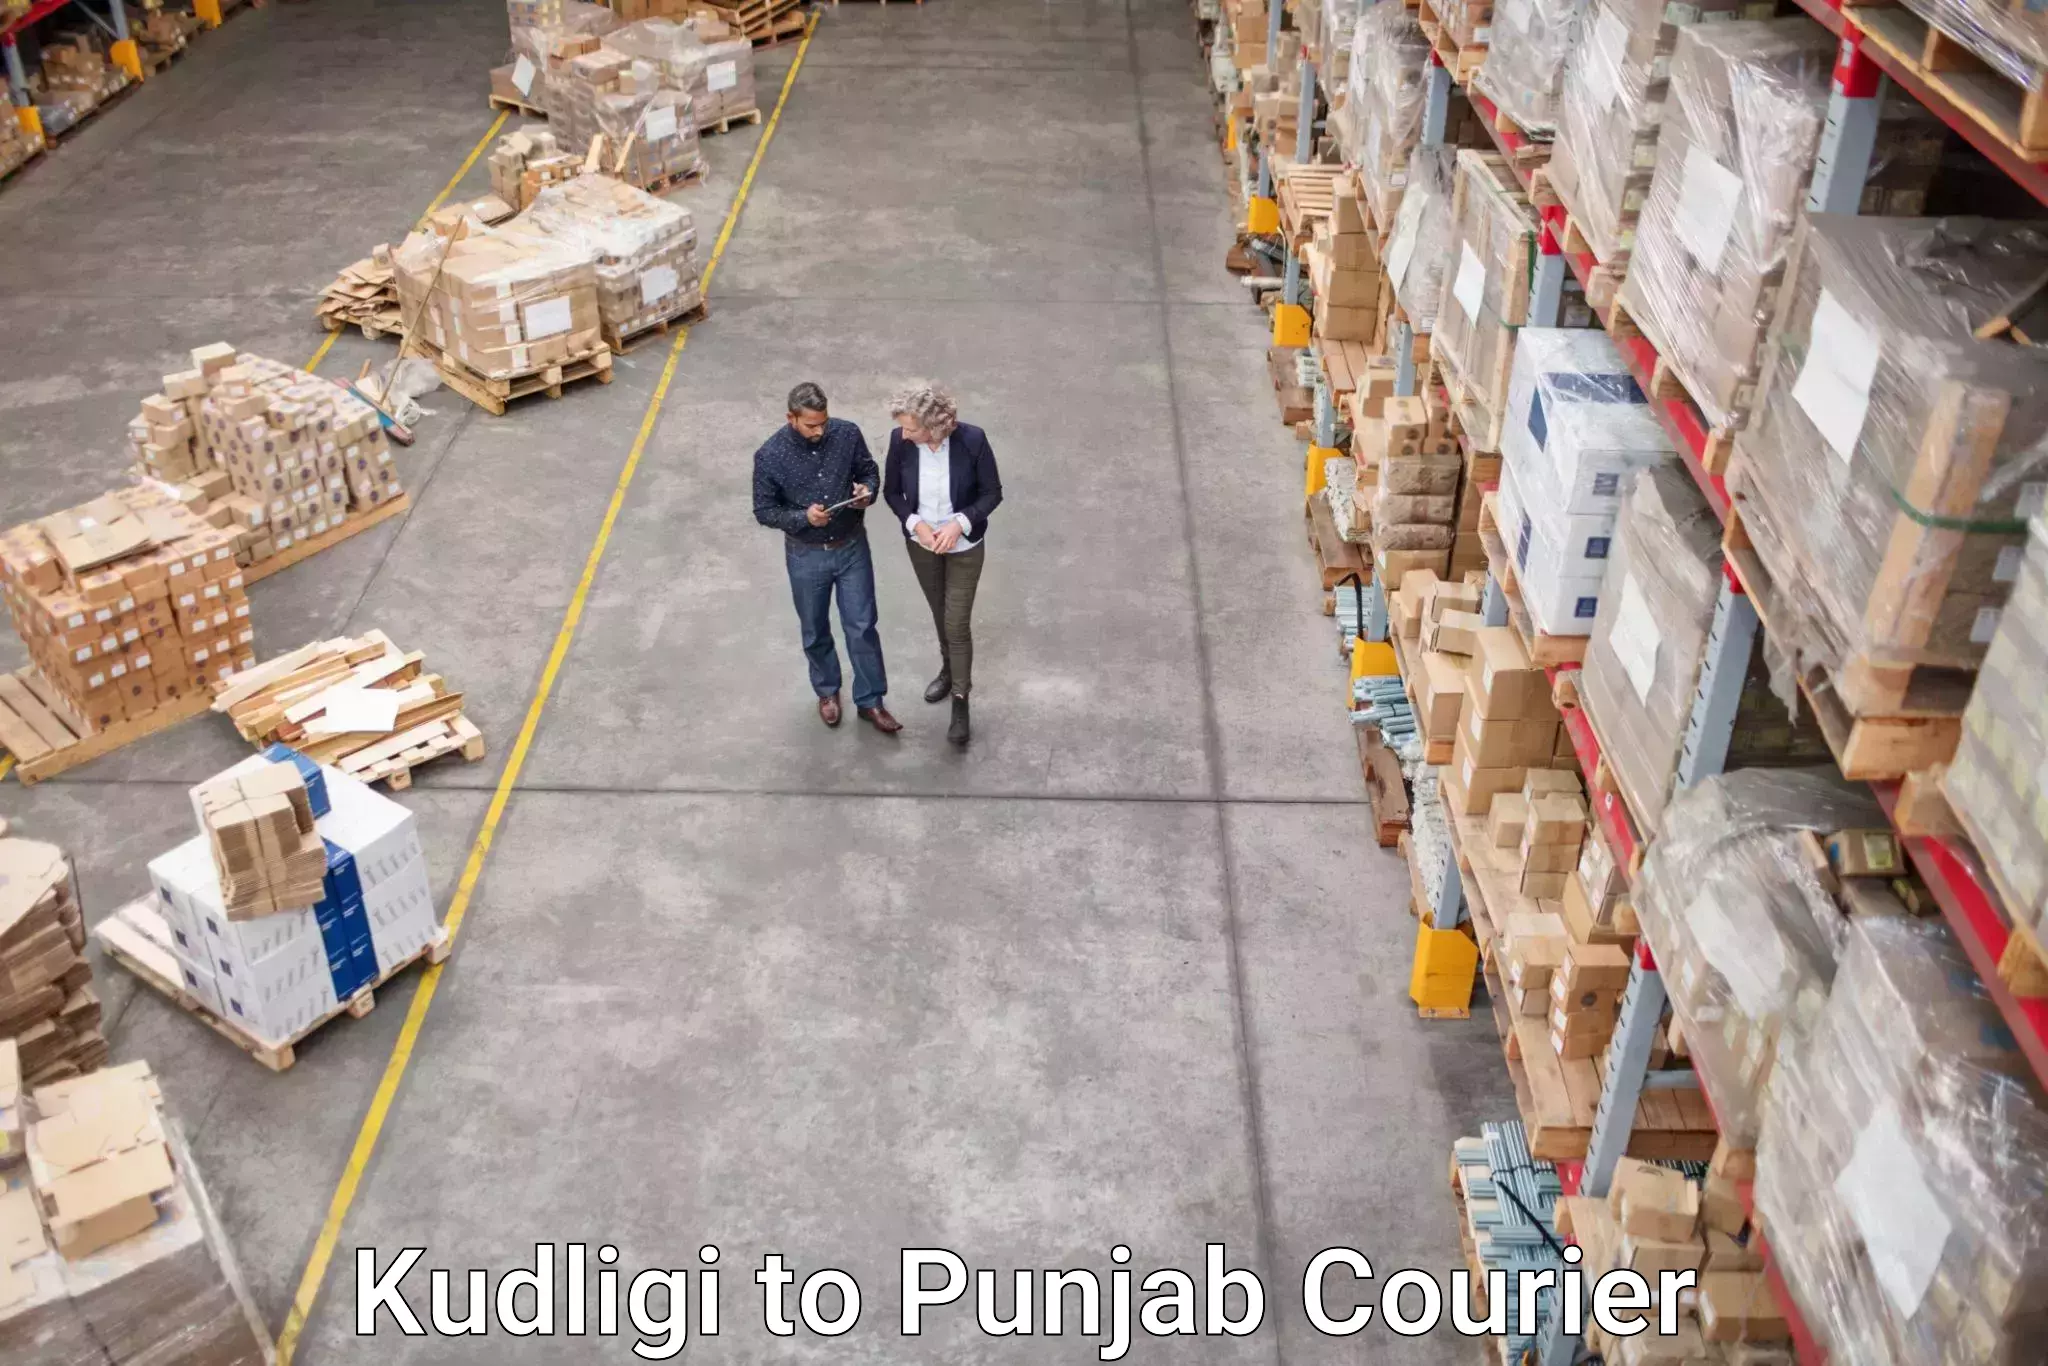 Courier service booking Kudligi to Punjab Agricultural University Ludhiana